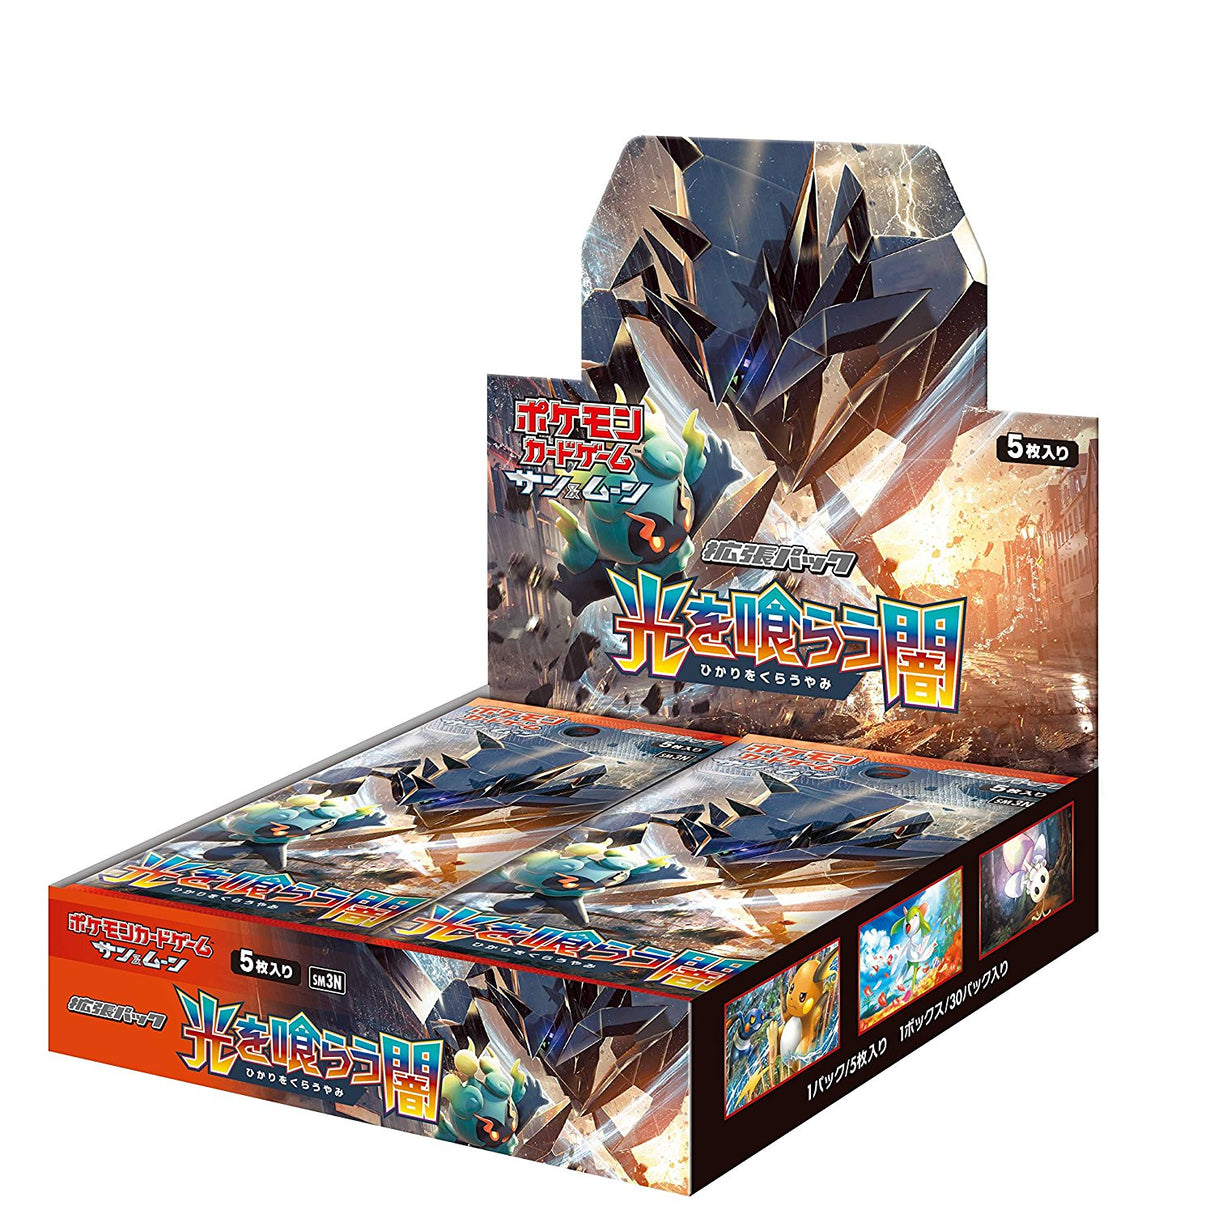 Japanese Pokemon Sun & Moon SM3N "Darkness that Consumes Light" Booster Box